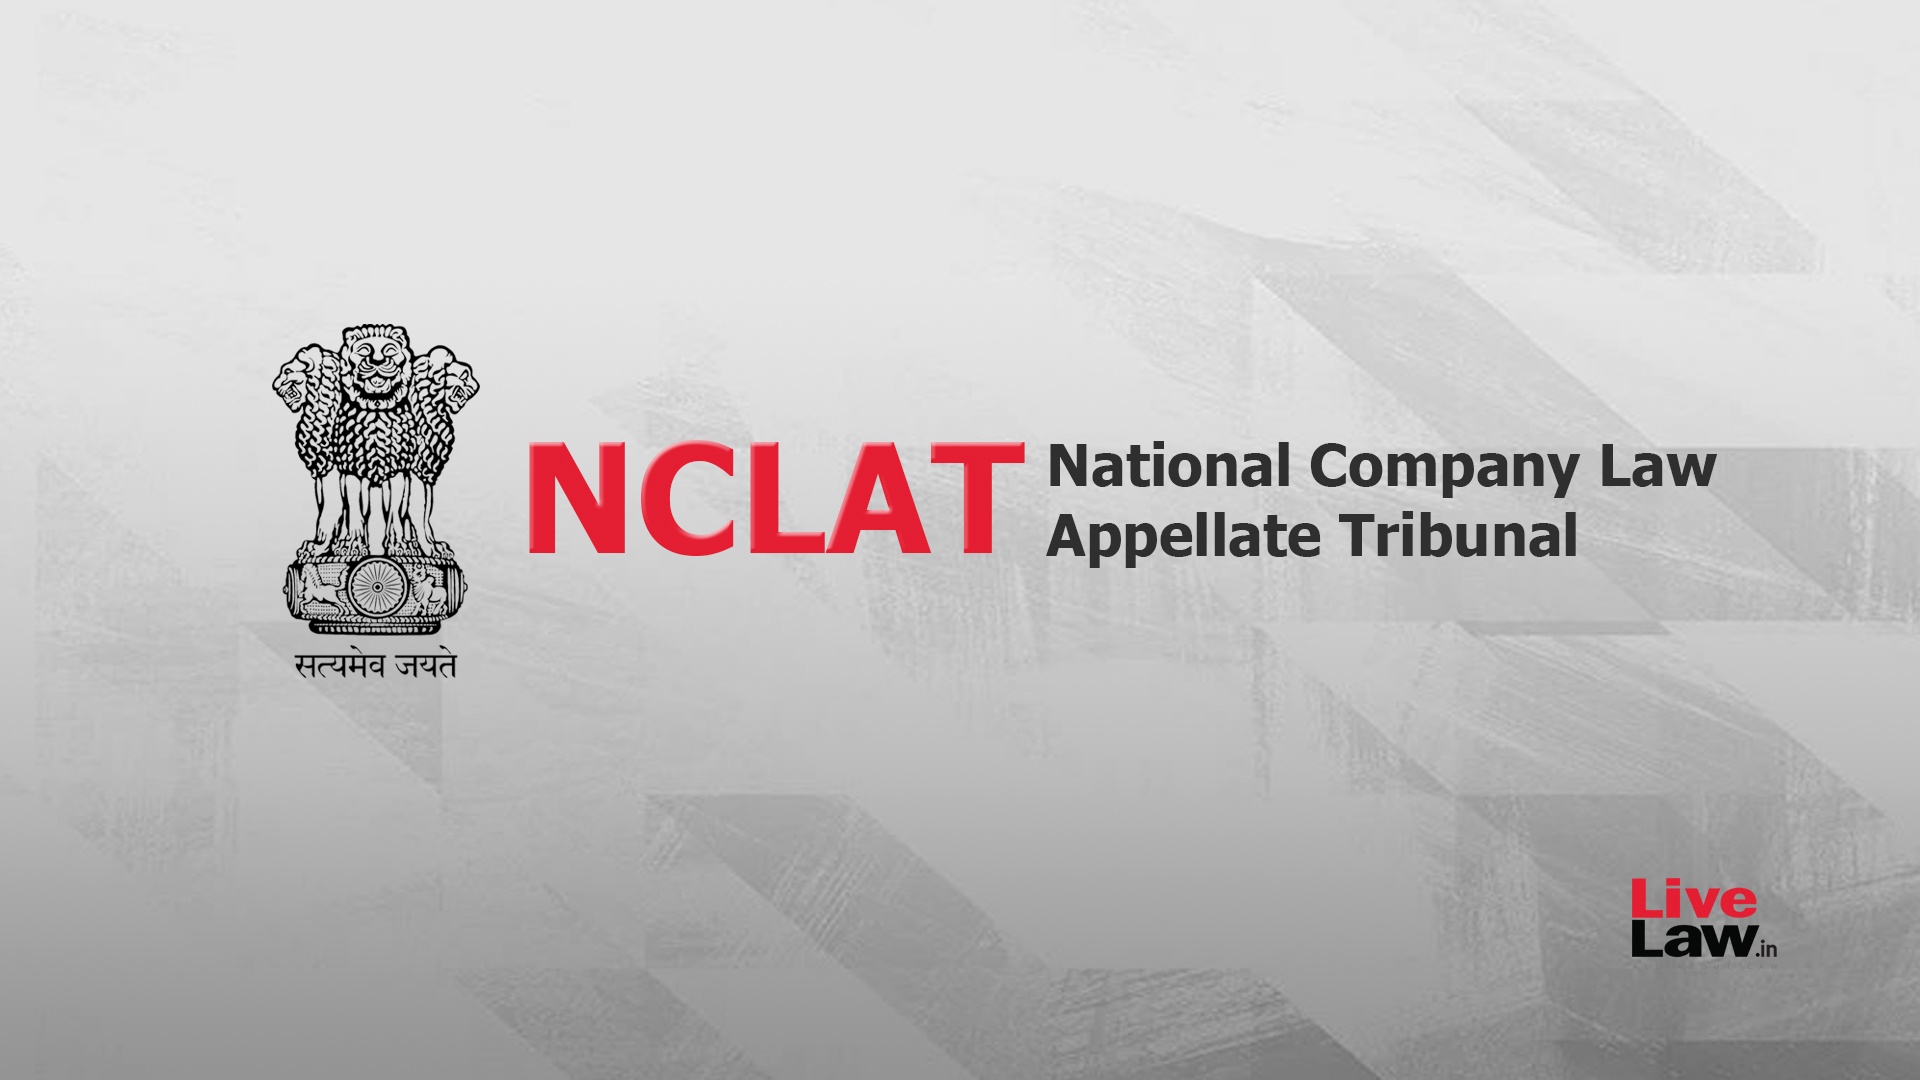 AA Obliged To Direct For Liquidation Only If COC’S Decision To Liquidate Is In Accordance With IBC: NCLAT Delhi